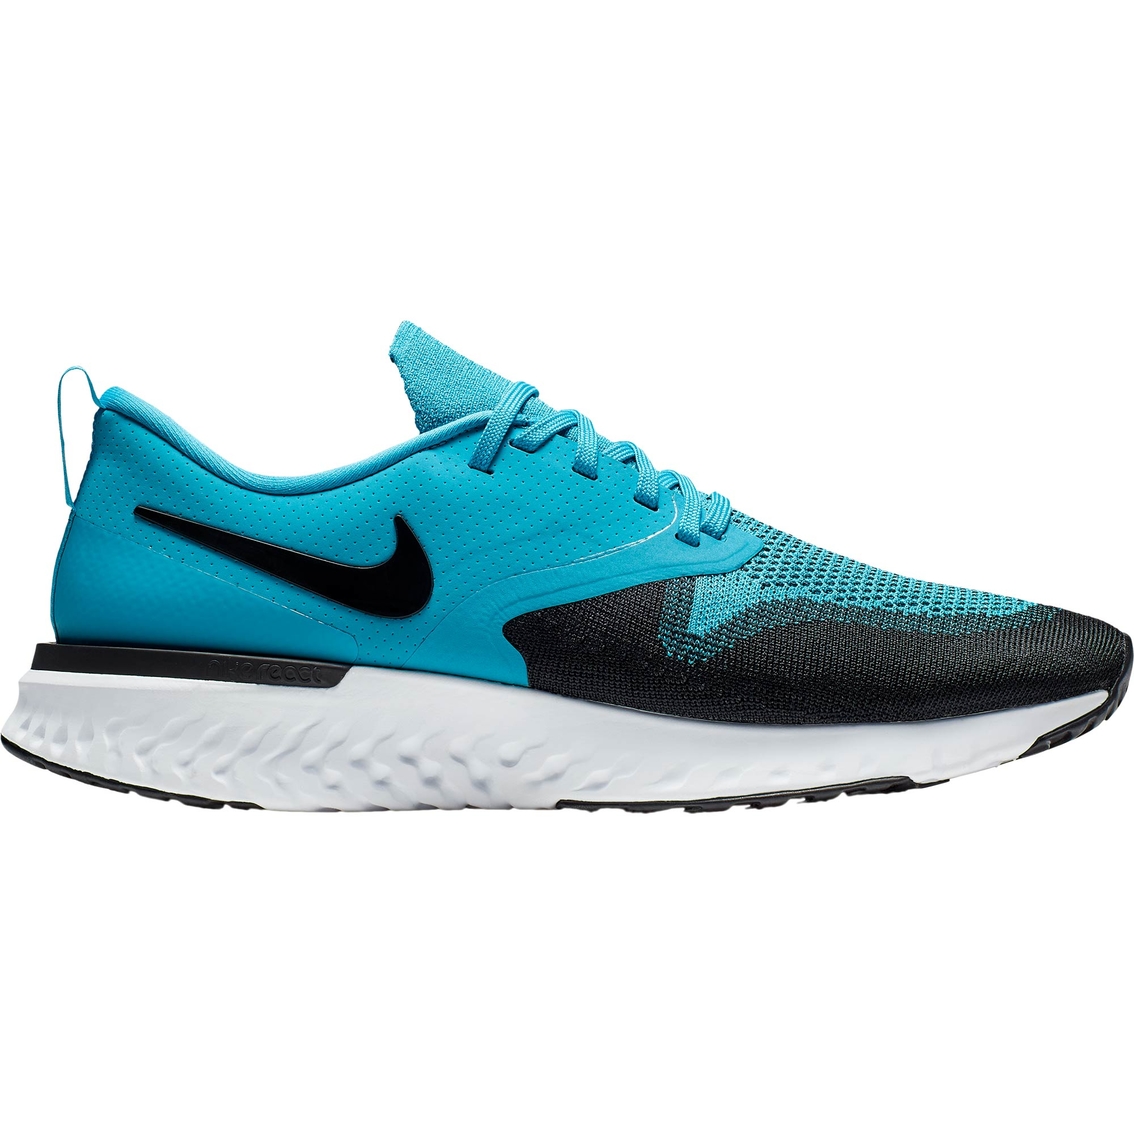 Nike Men's Odyssey React 2 Flyknit Running Shoes | Men's Athletic Shoes ...